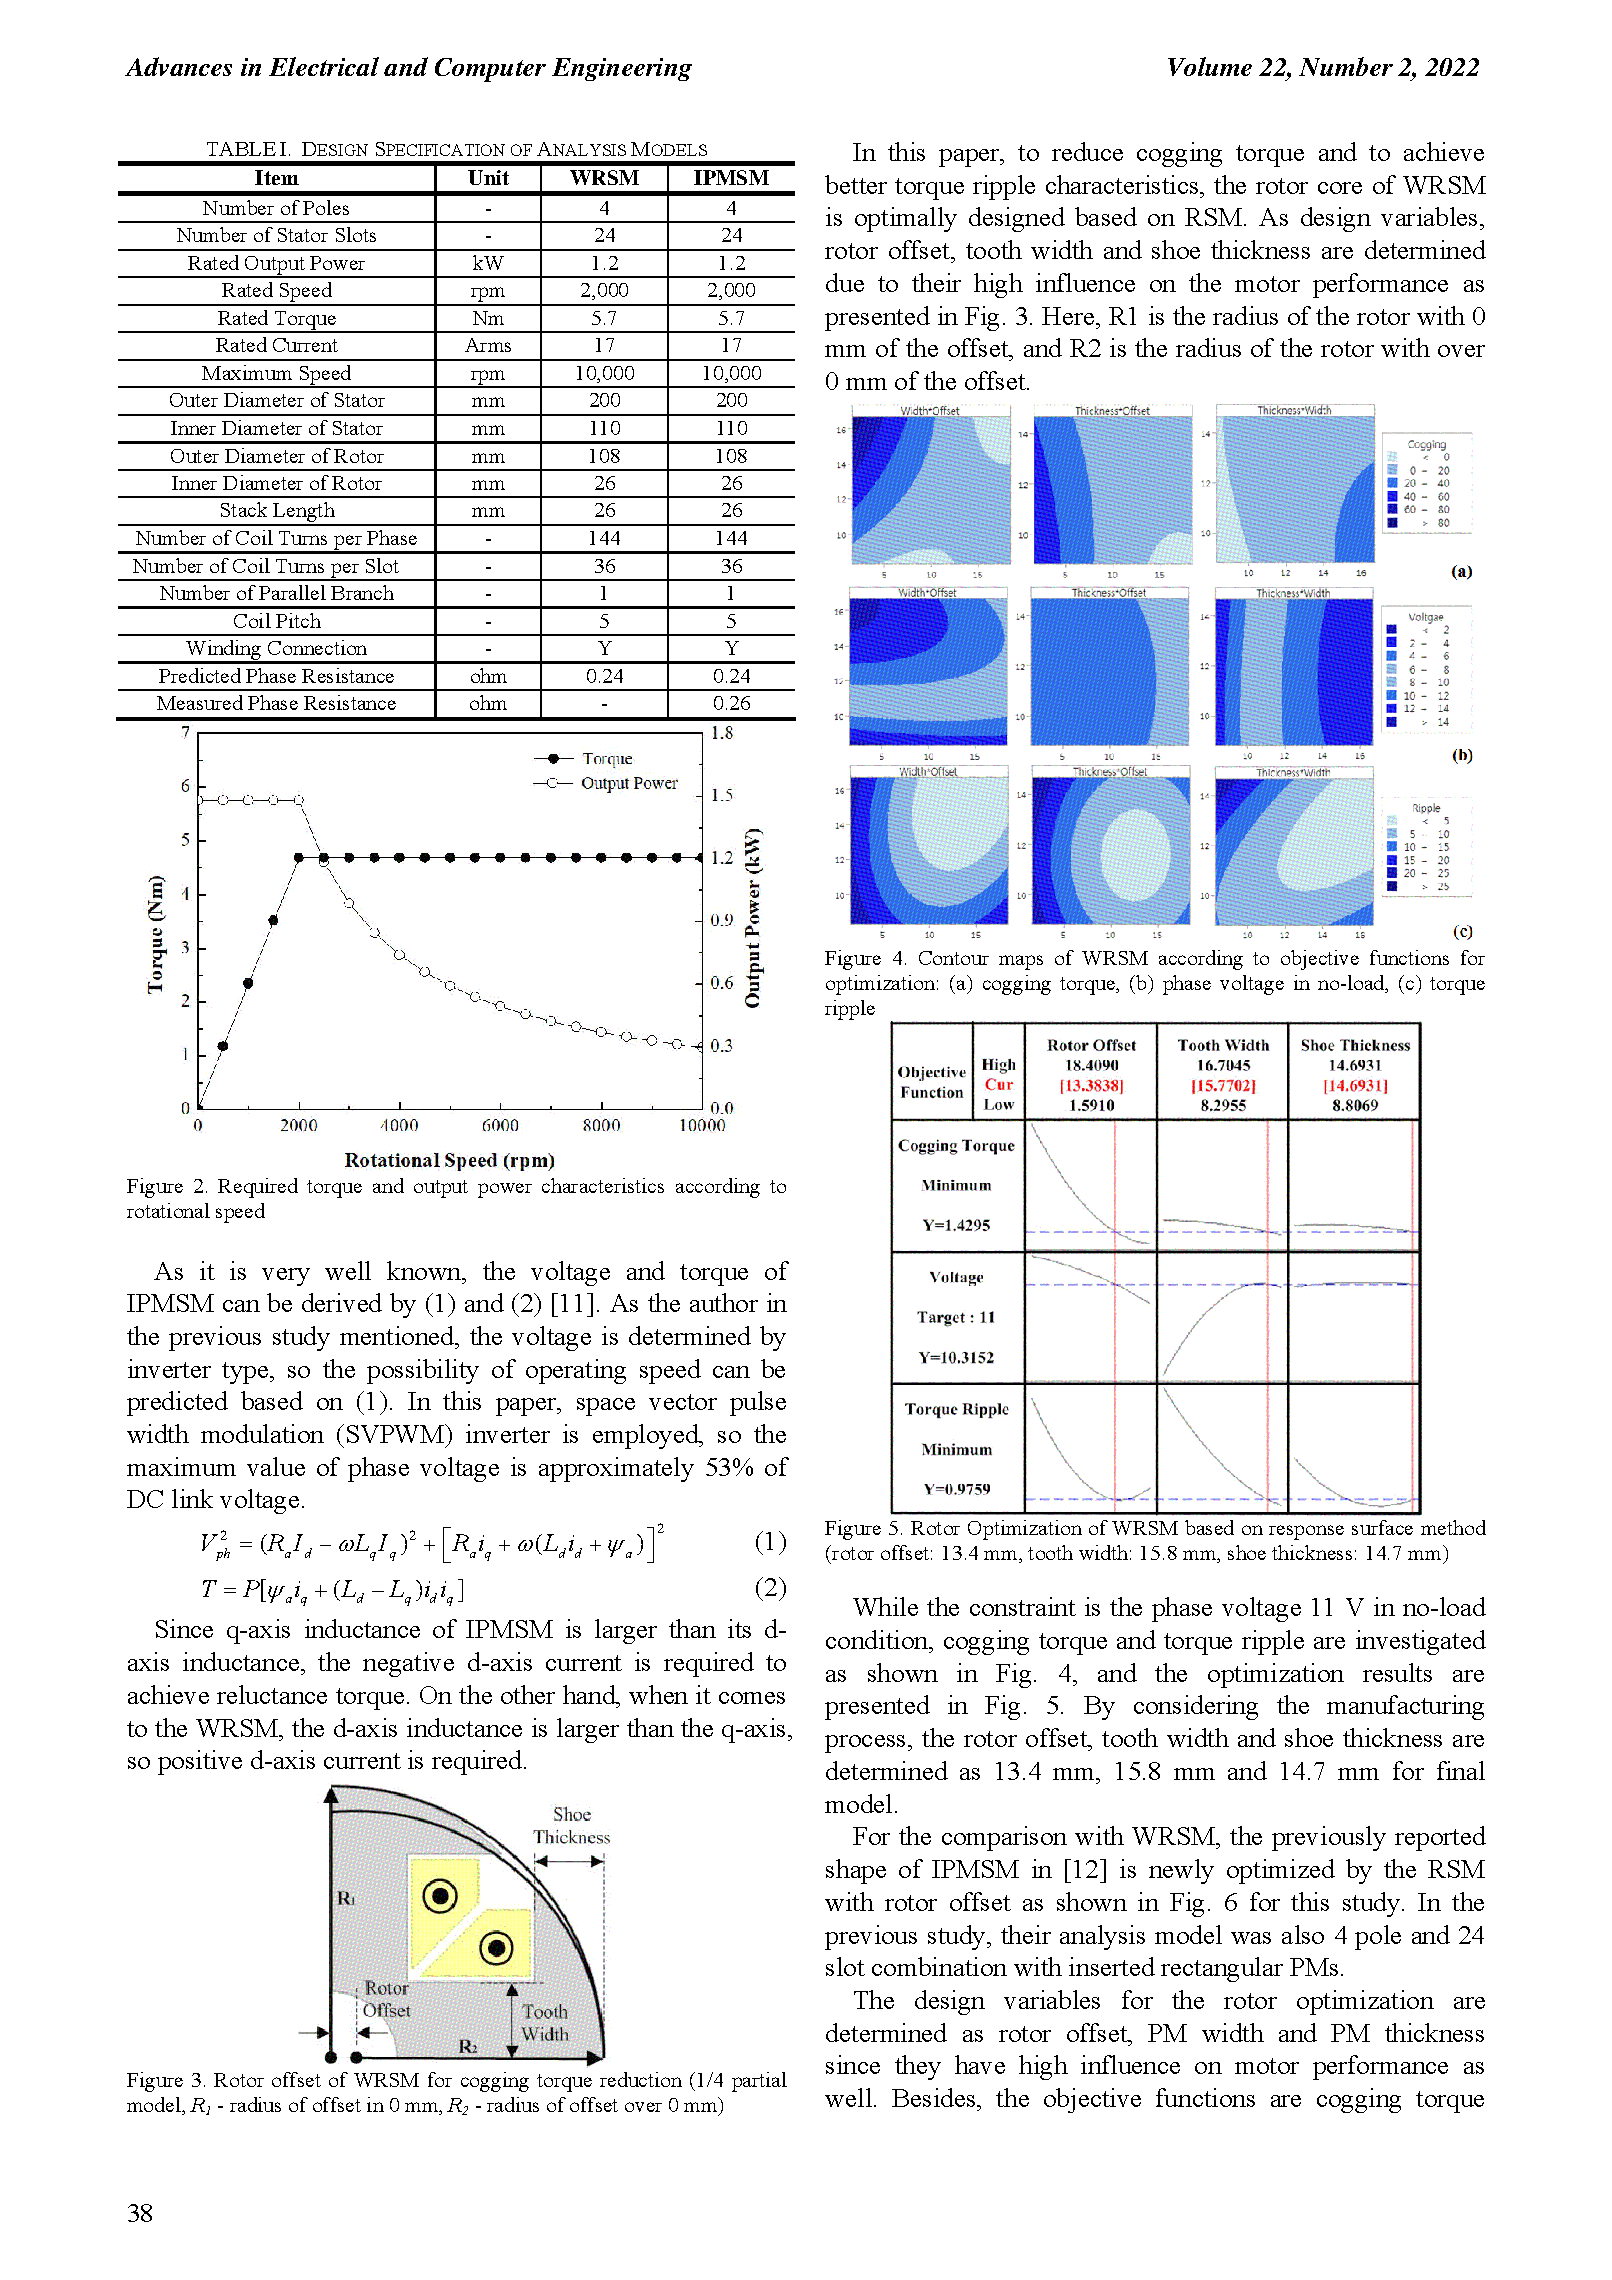 PDF Quickview for paper with DOI:10.4316/AECE.2022.02005